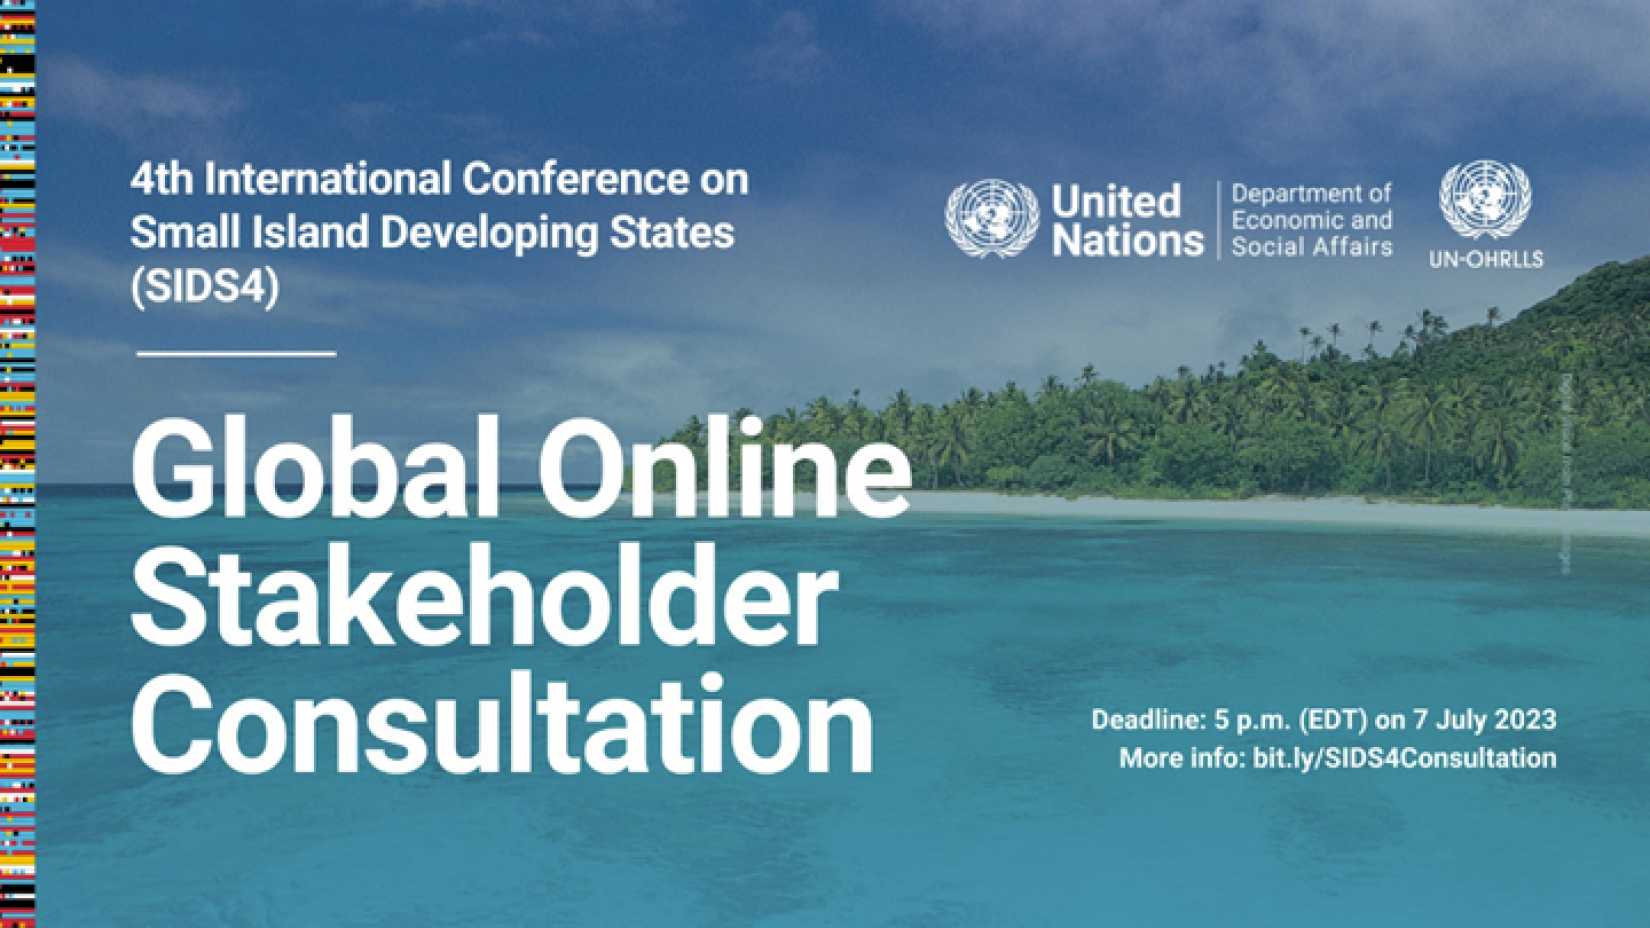 Participate in the Global online stakeholder consultation